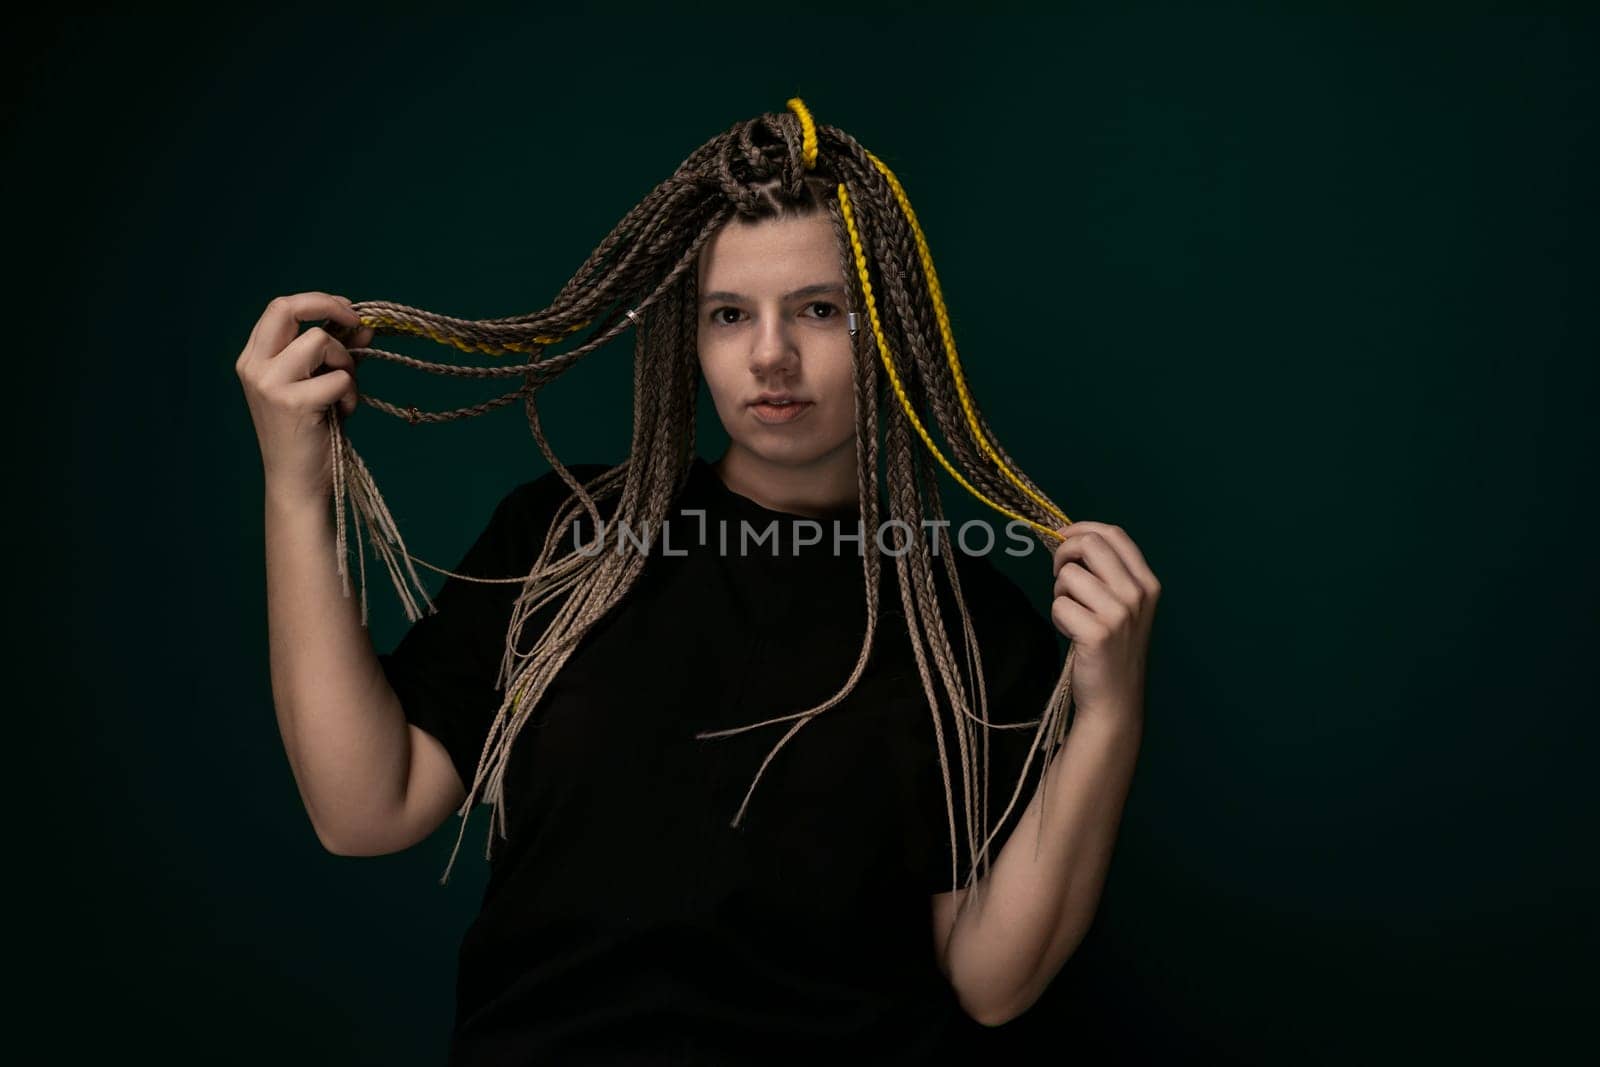 A woman with dreadlocks on her head is standing and looking at the camera. She has long, twisted hair that falls down her back. The dreadlocks are neatly styled and showcase her unique hair texture.